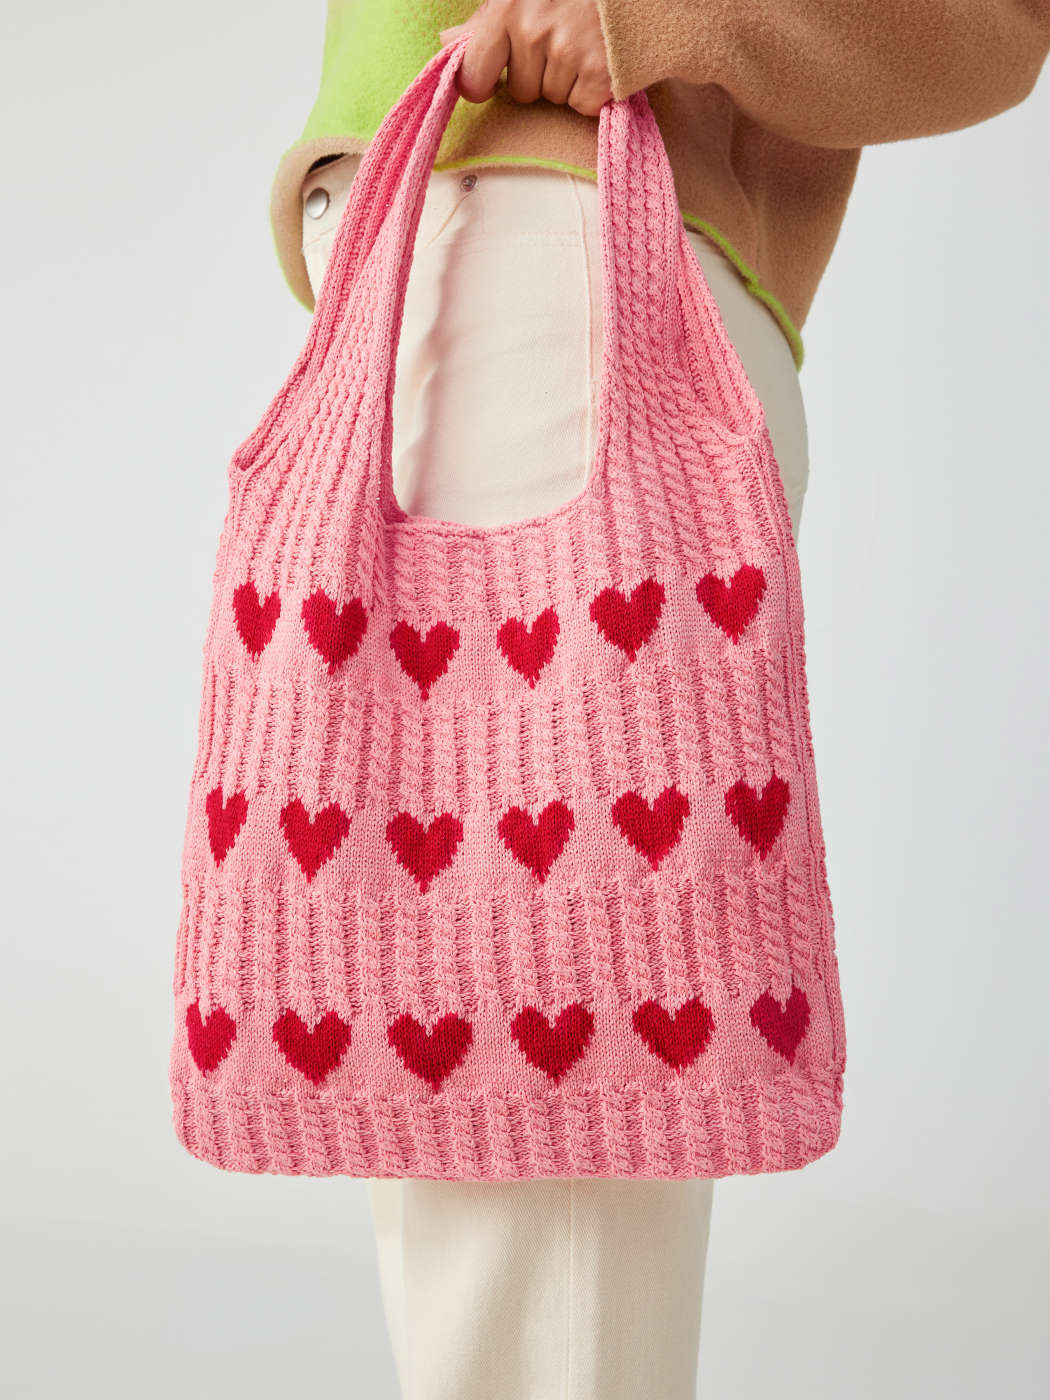 Heart Pattern Braided Tote Bag - Cider